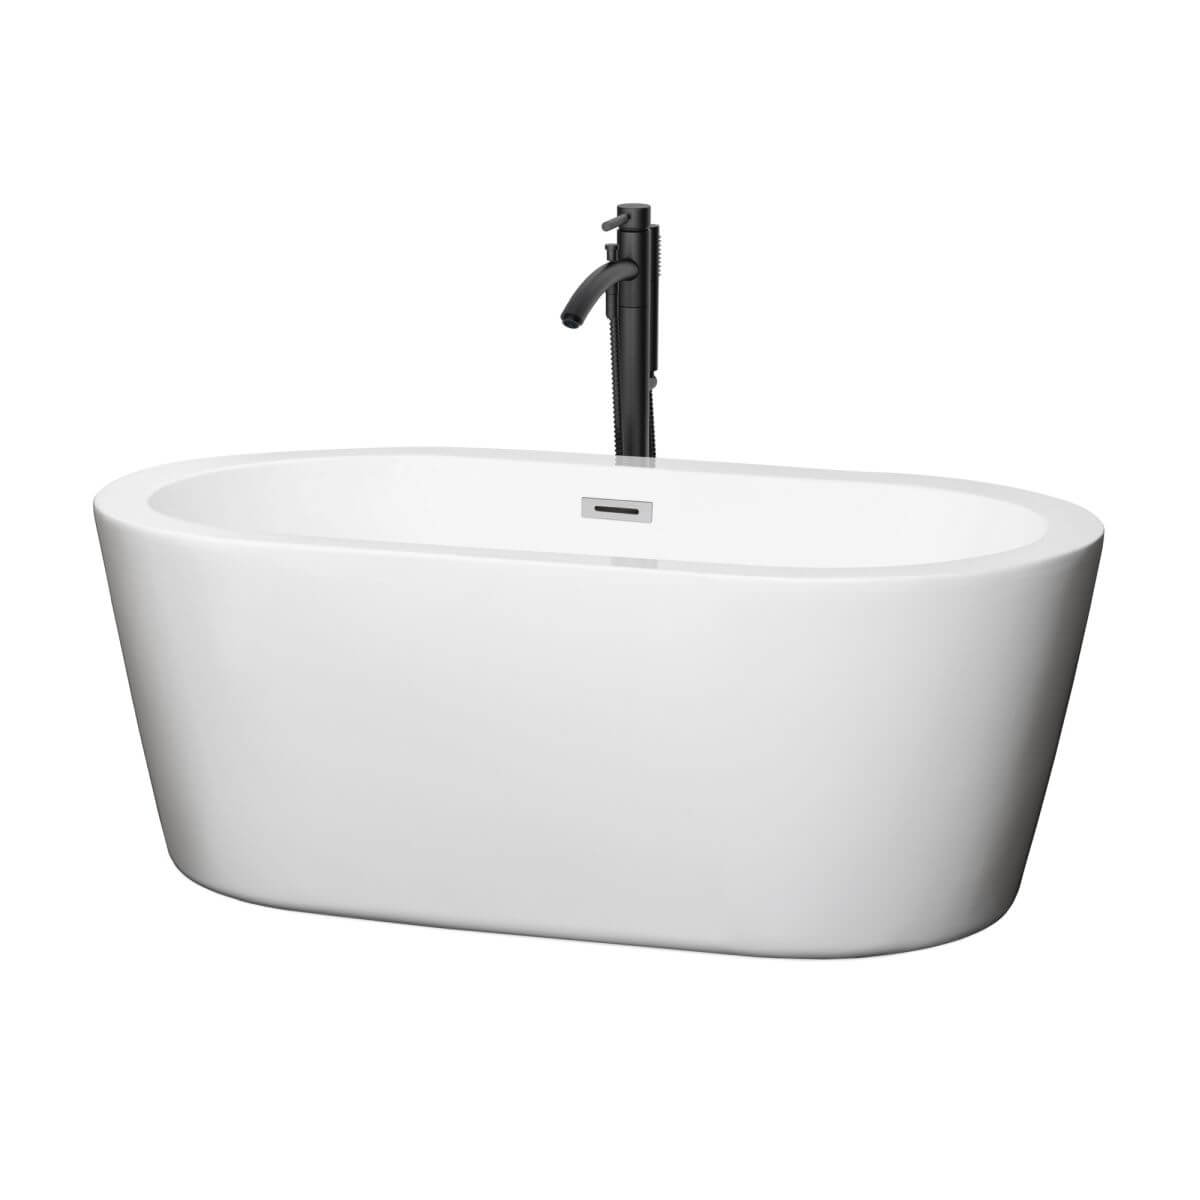 Wyndham Collection Mermaid 60 inch Freestanding Bathtub in White with Polished Chrome Trim and Floor Mounted Faucet in Matte Black - WCOBT100360PCATPBK